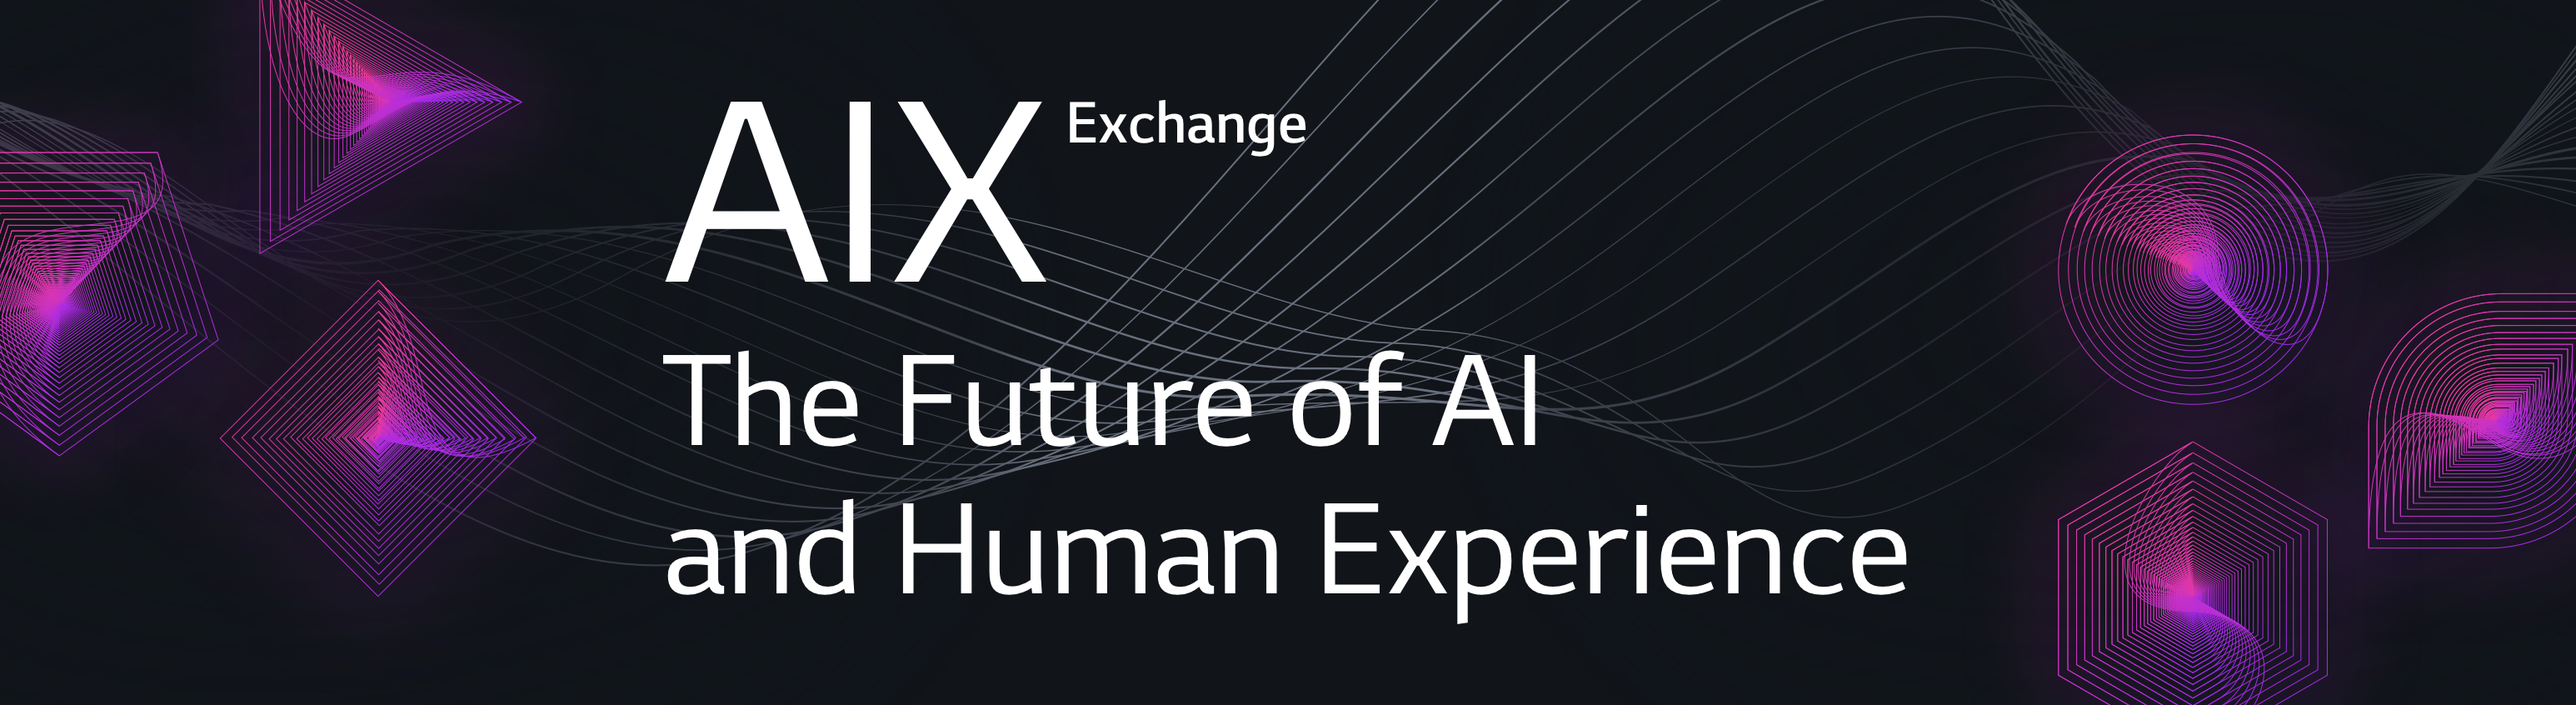 AIX Exchange 배너 이미지, The Future of AI and Human Experience